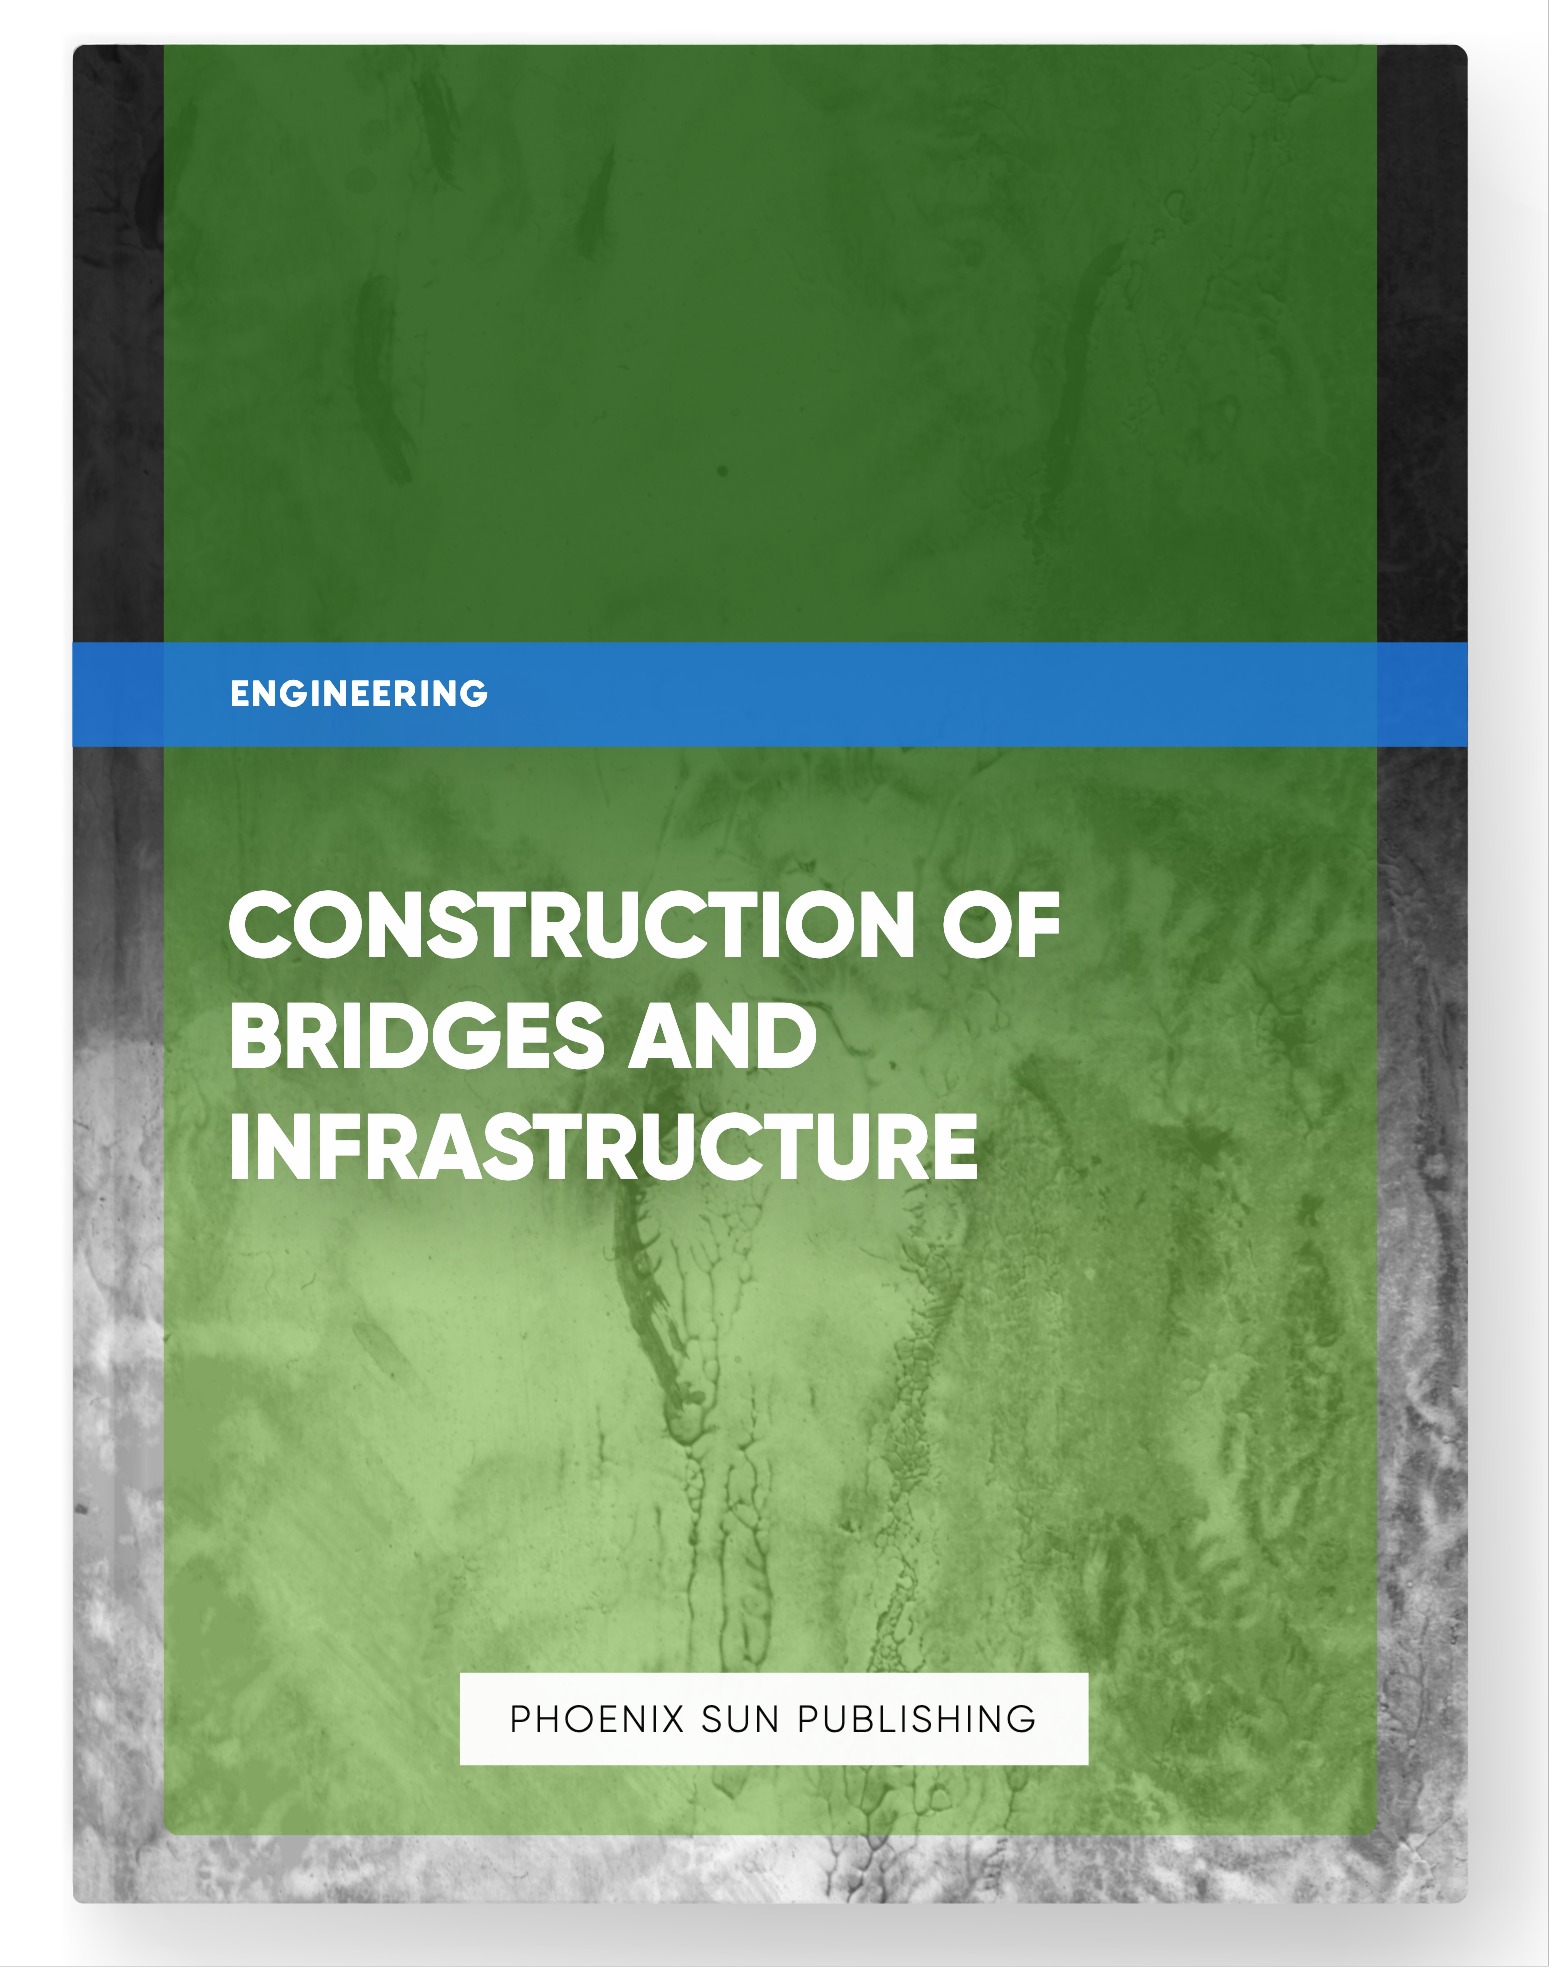 Construction of Bridges and Infrastructure